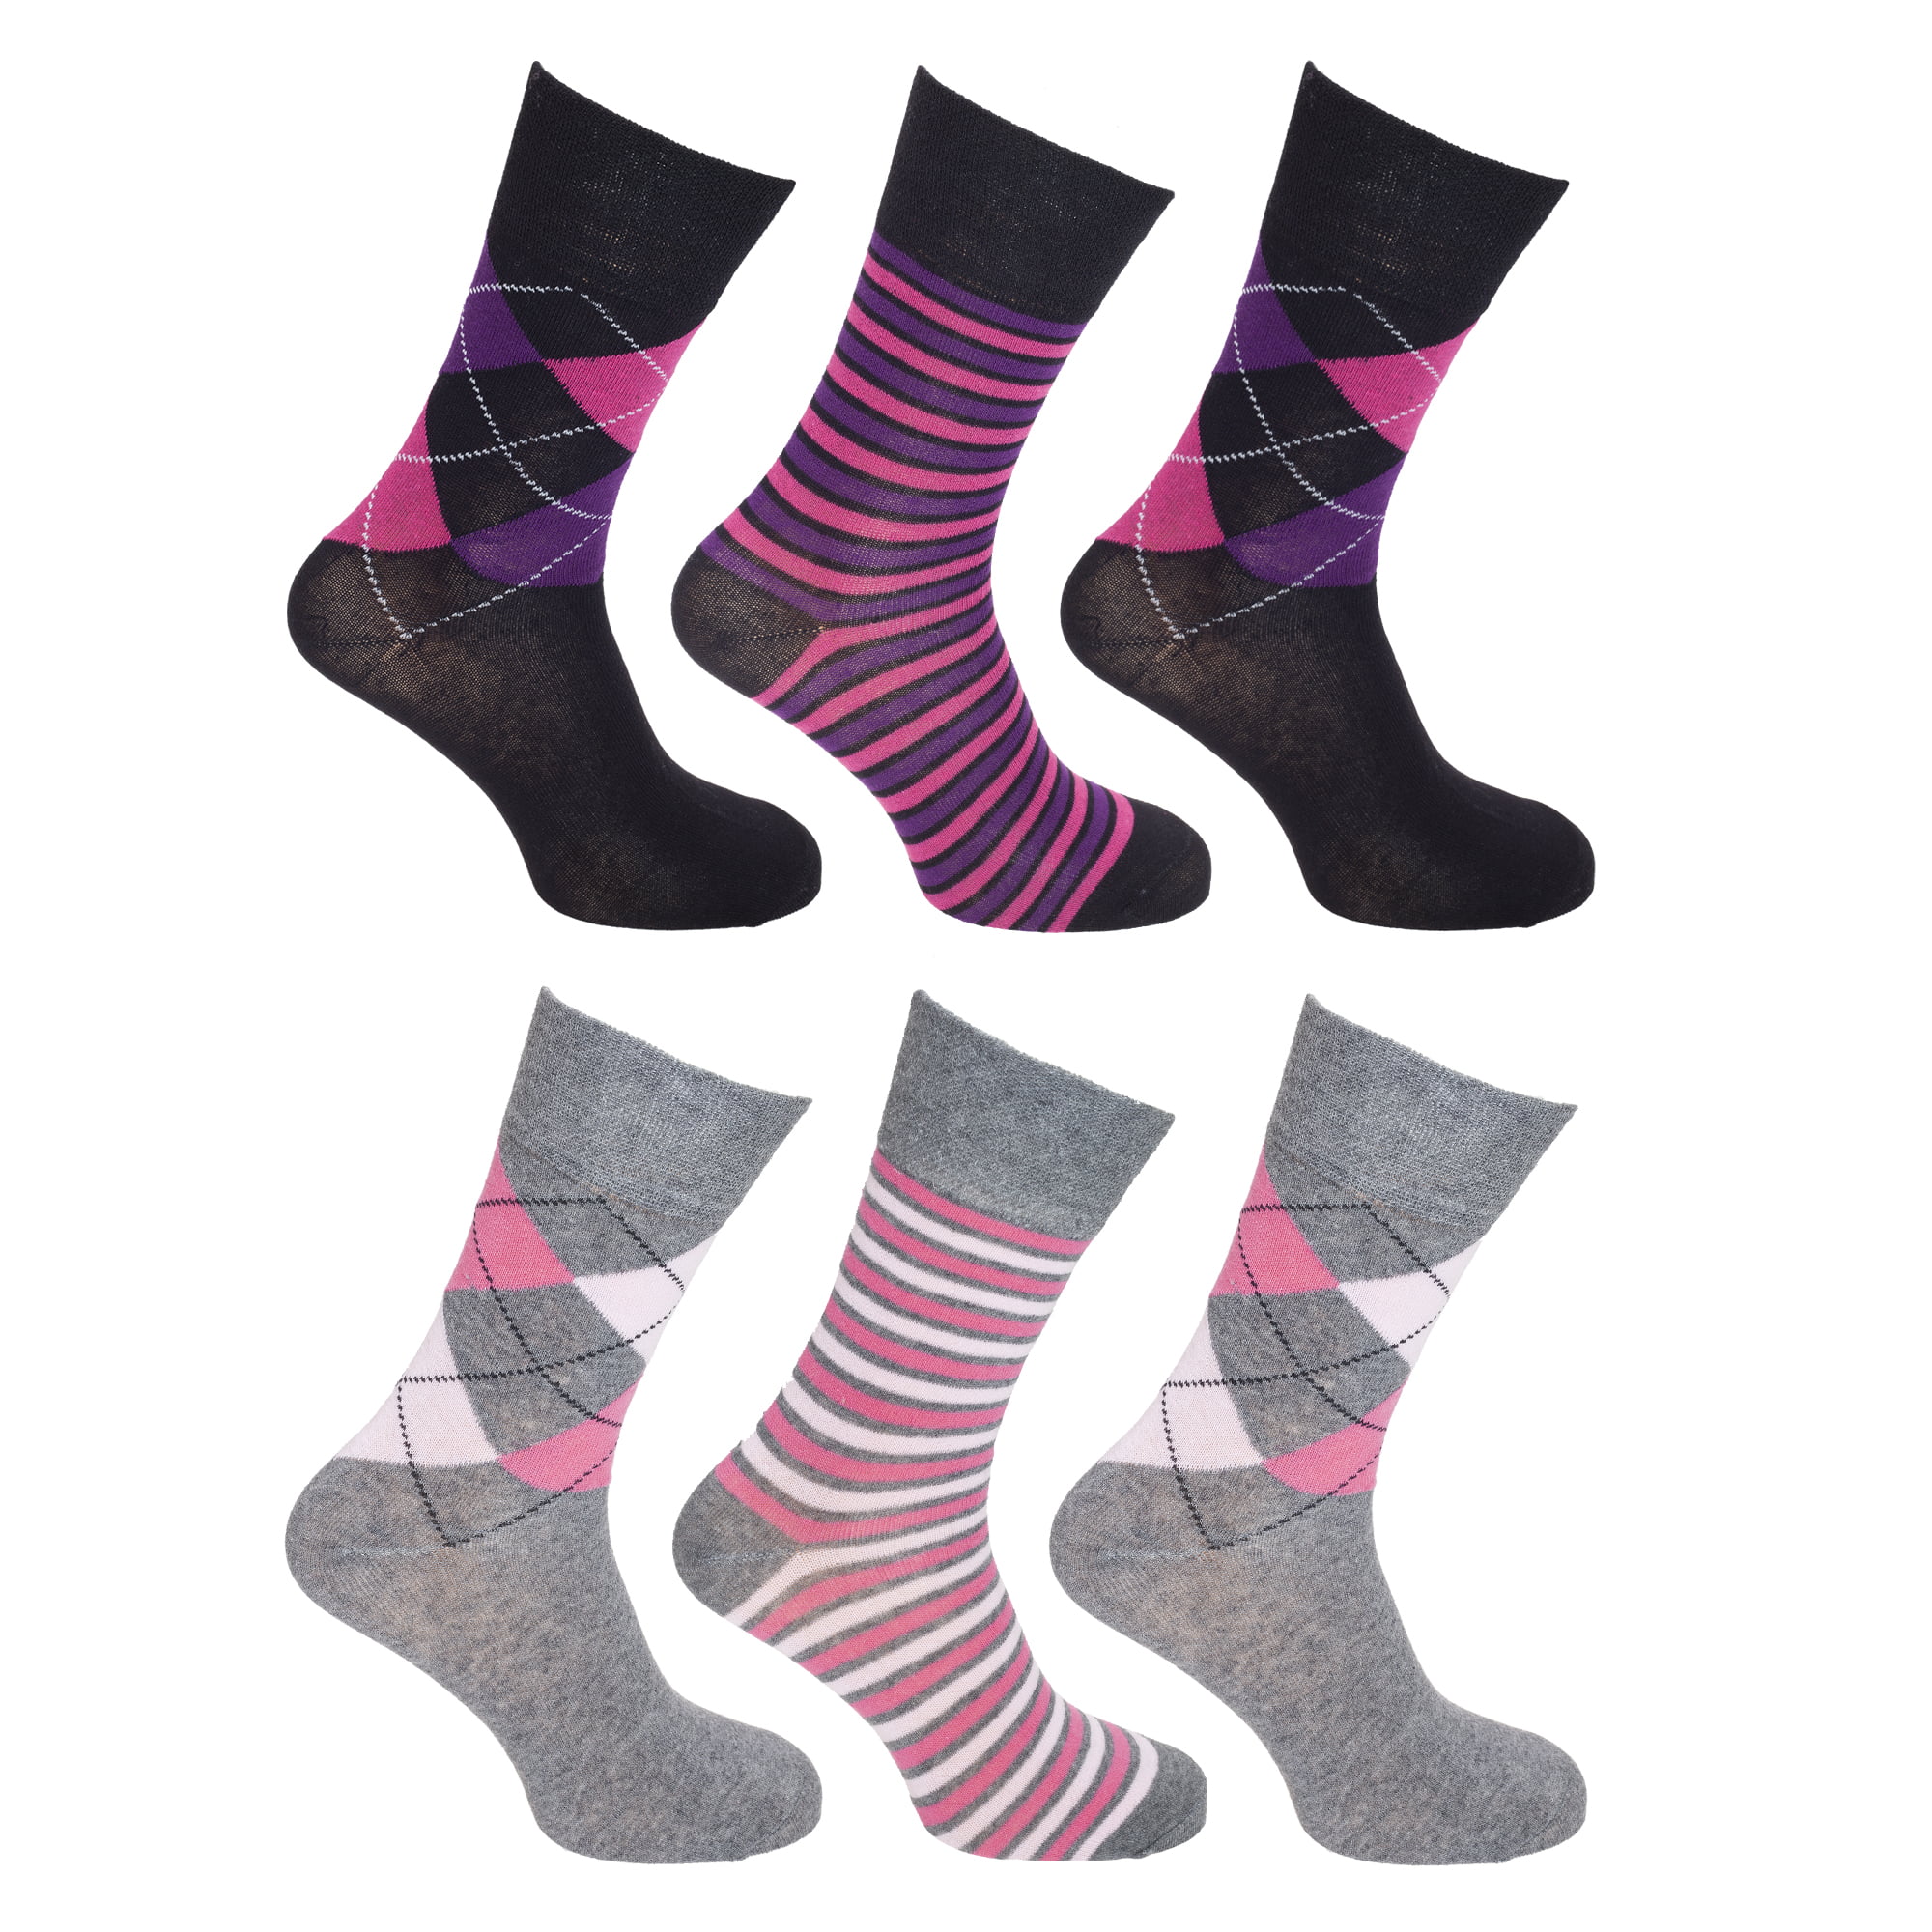 6 Pair Assorted Womens Pink Sox Ankle Socks Fits Shoe 4-10 Flamingo Stripes 